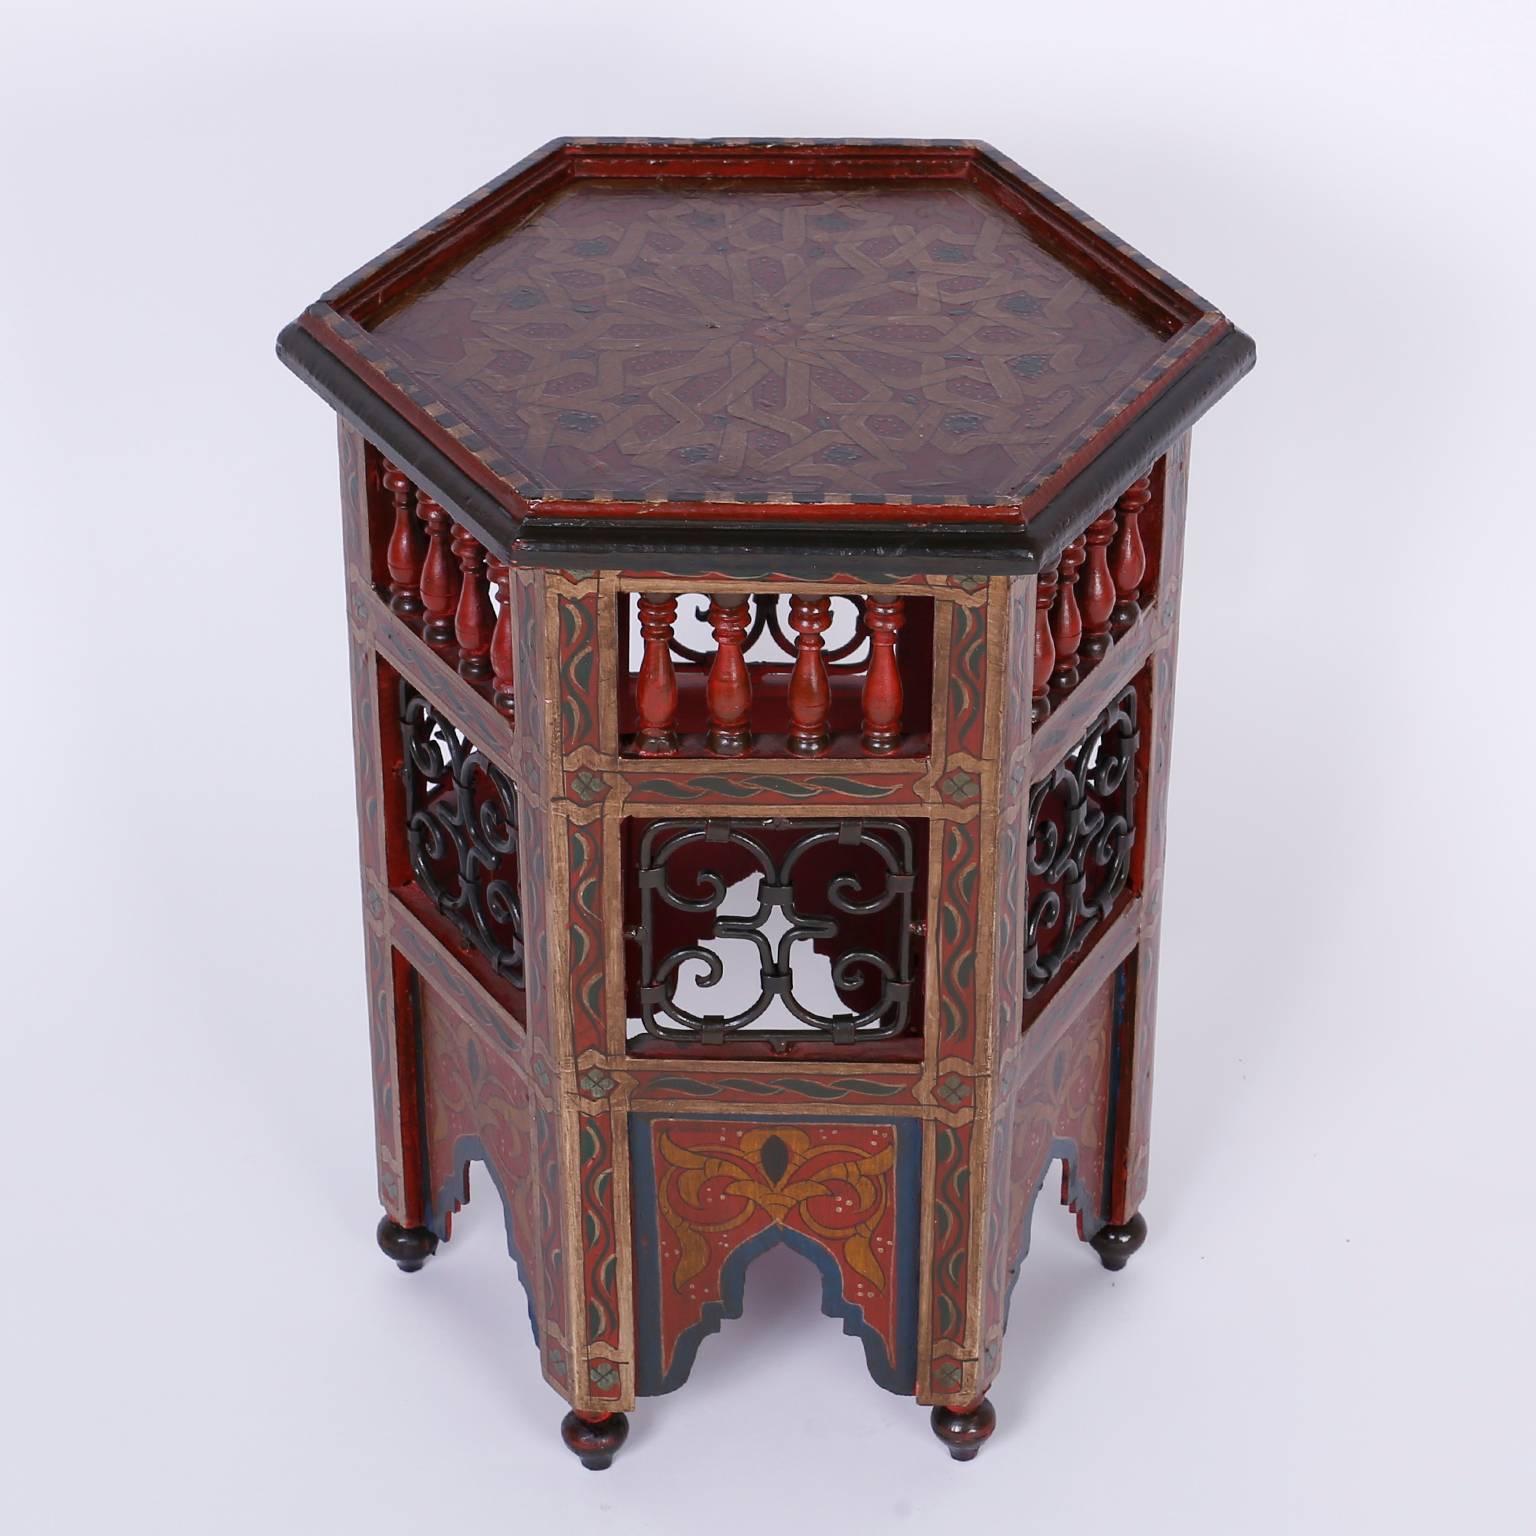 Exotic Moroccan drink stand or occasional table with a hexagon form and open air panels decorated with spindles and wrought iron. Featuring delightful geometric and floral paintings throughout and Moorish arches over onion bulb feet.